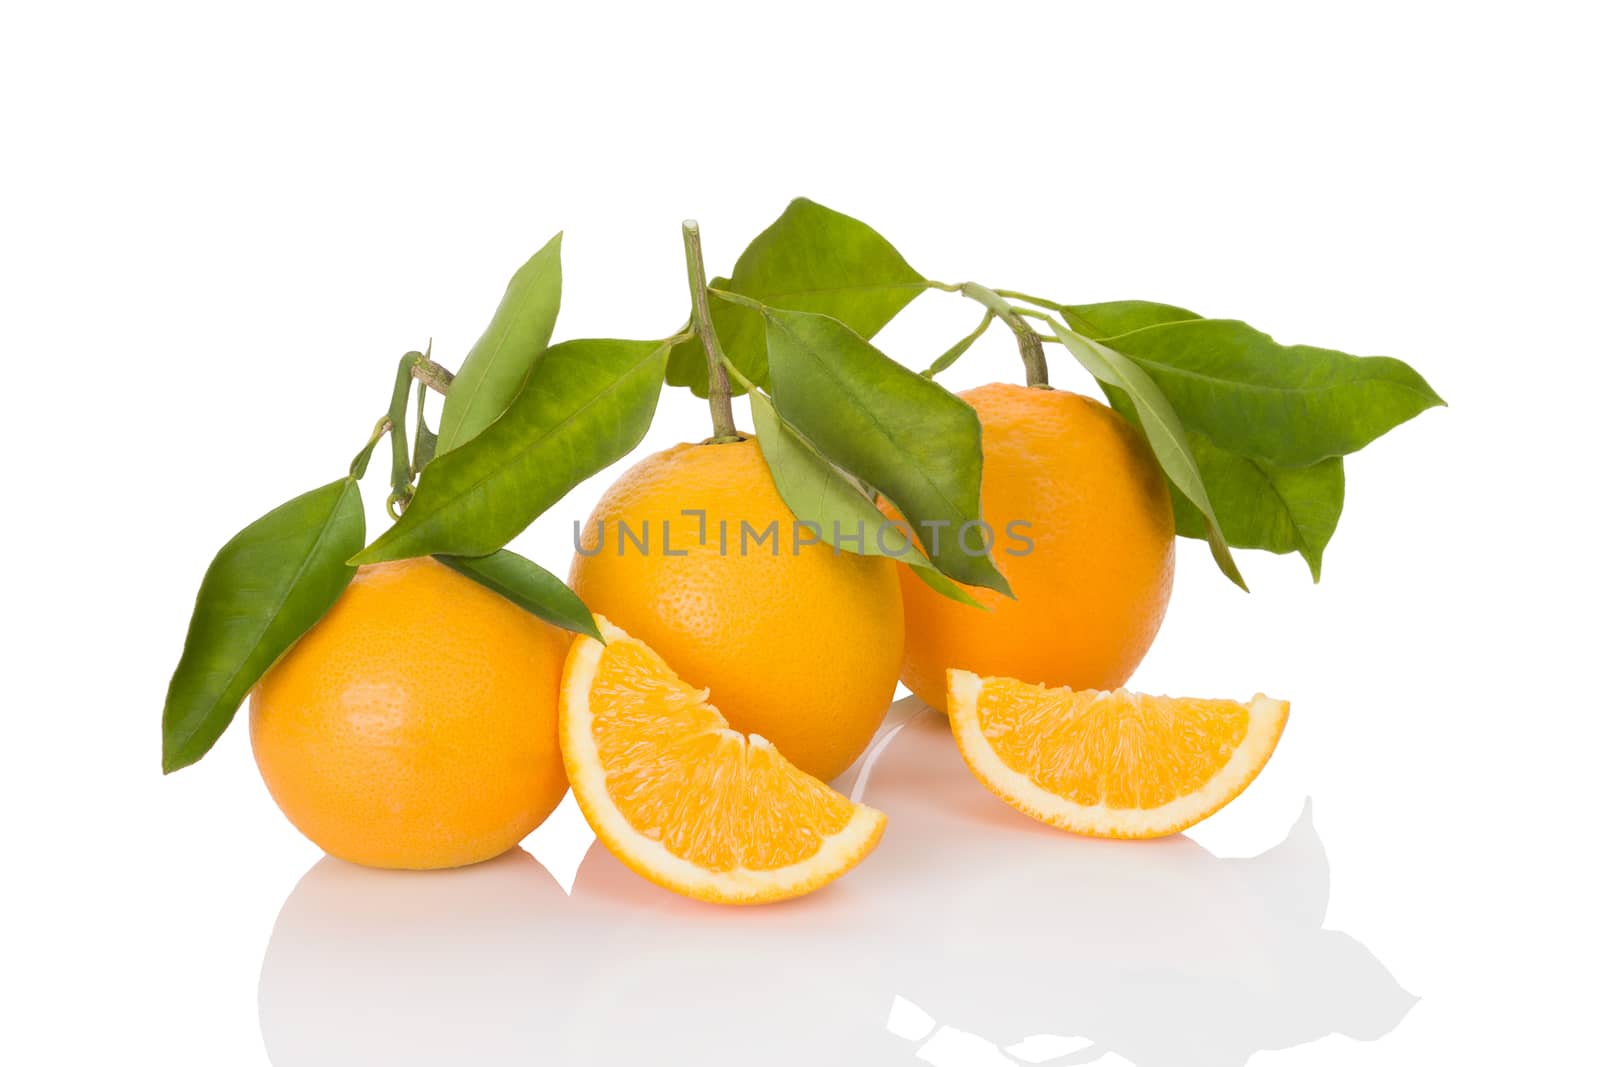 Delicious whole oranges with leaves and slices isolated on white background. Healthy fruit eating. 